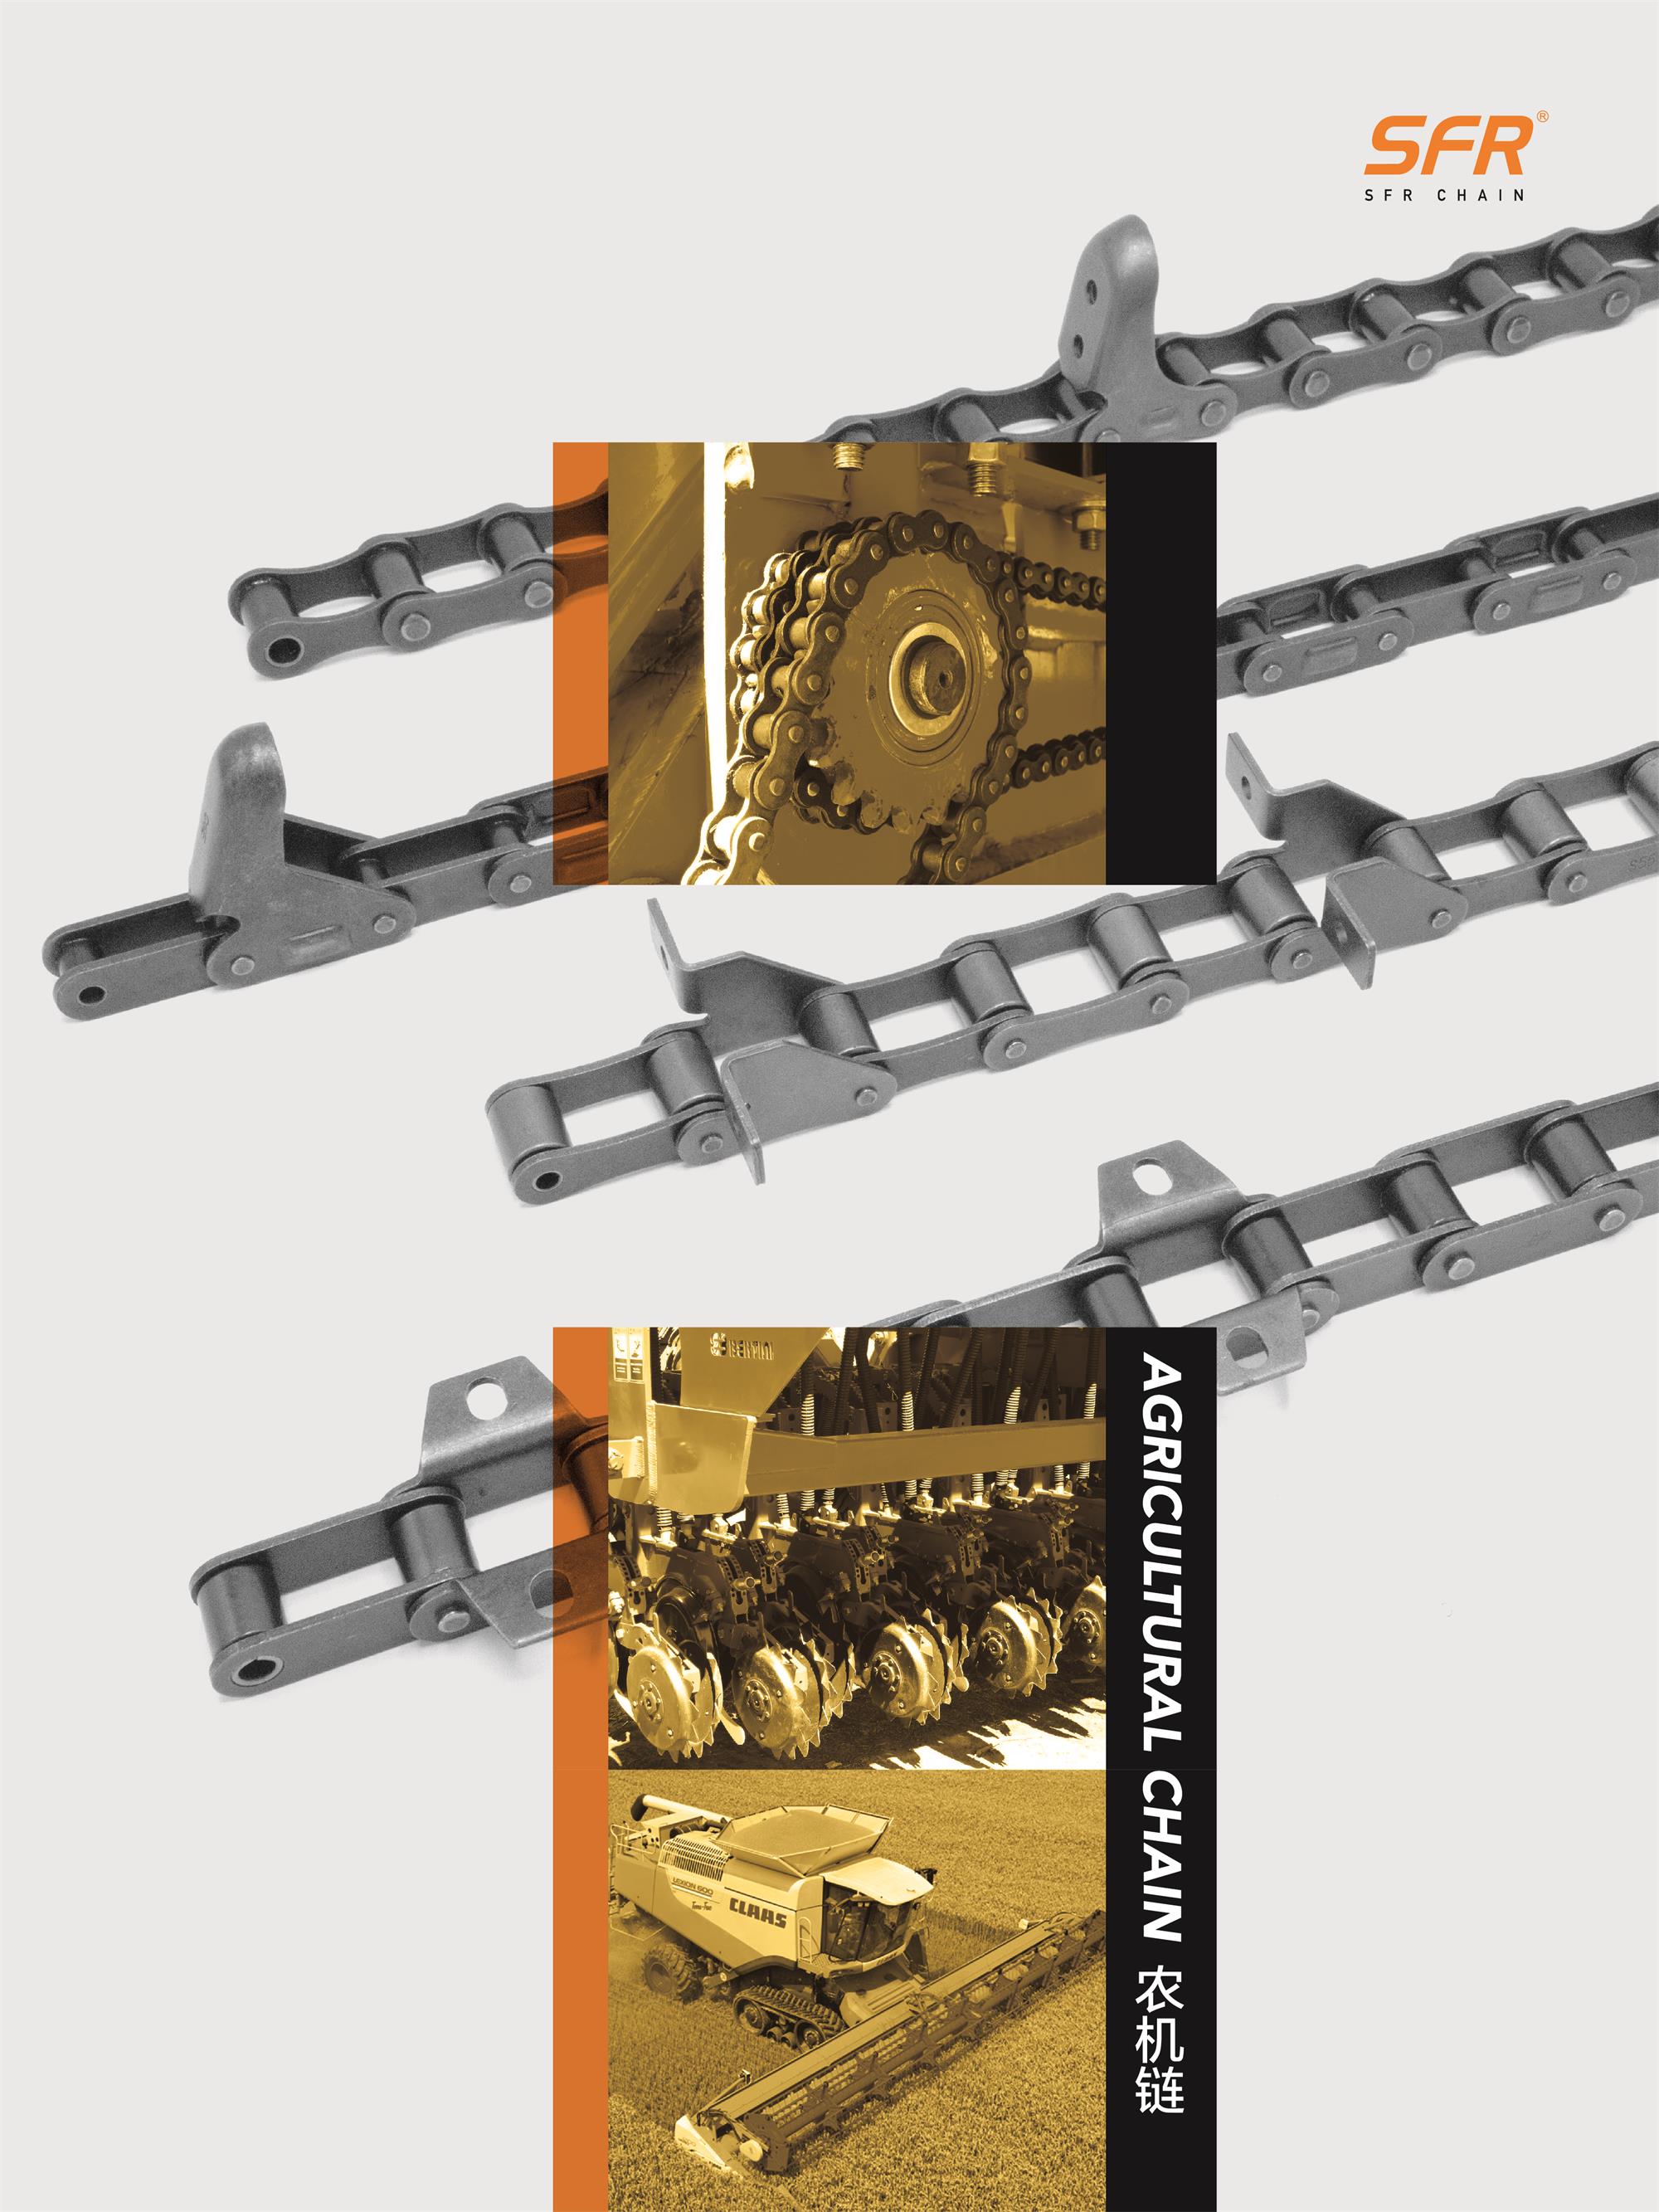 AGRICULTURAL CHAIN